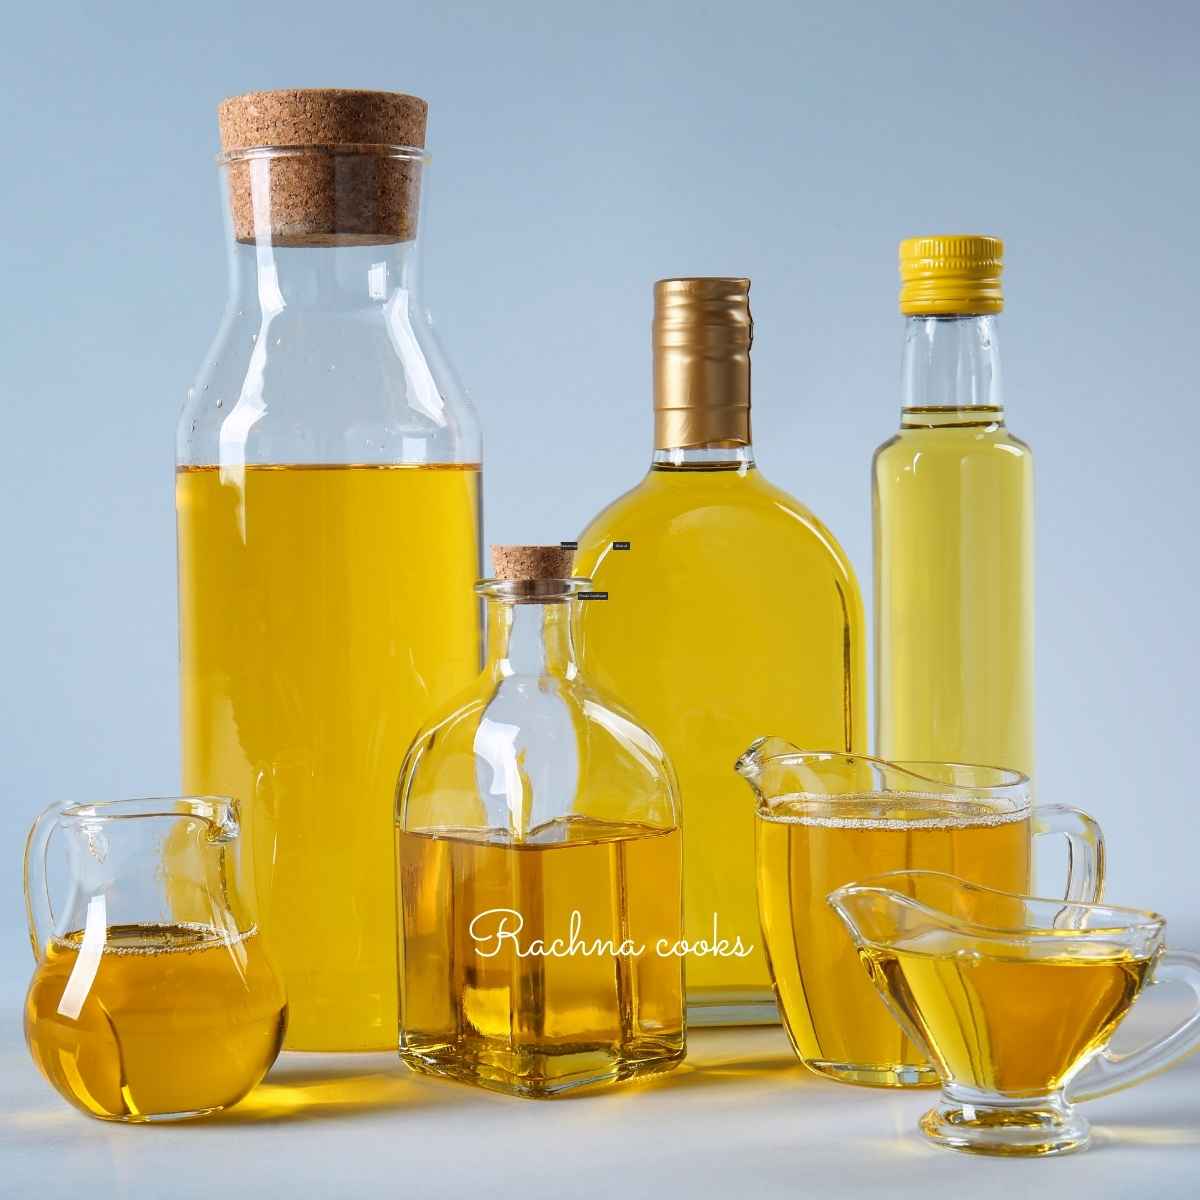 A variety of oils in bottles